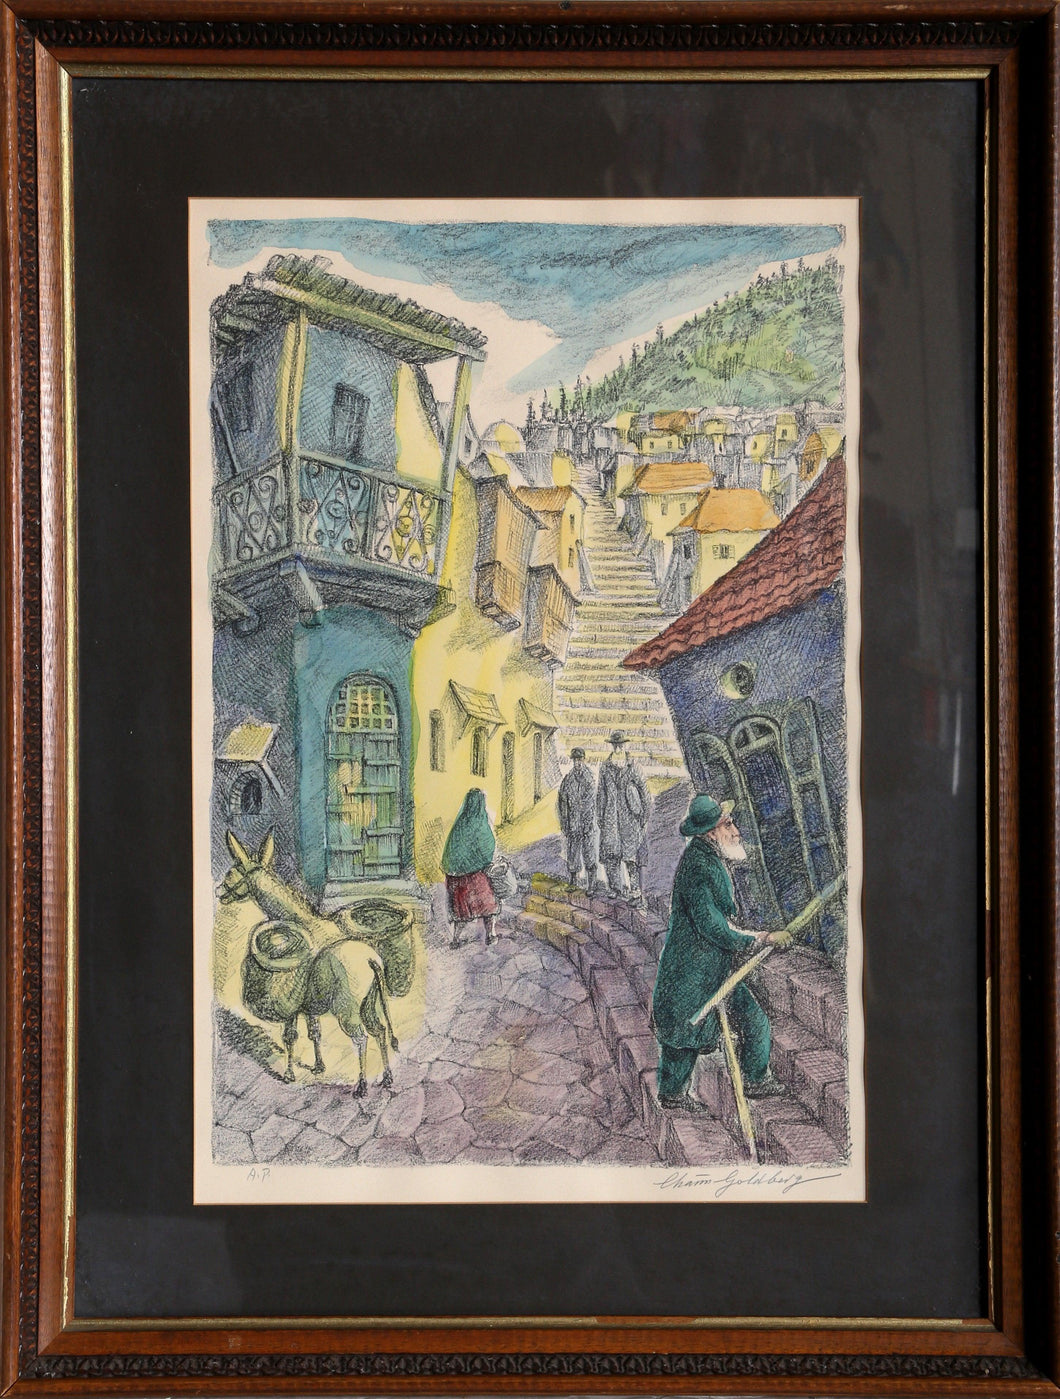 Street in Israel Lithograph | Chaim Goldberg,{{product.type}}